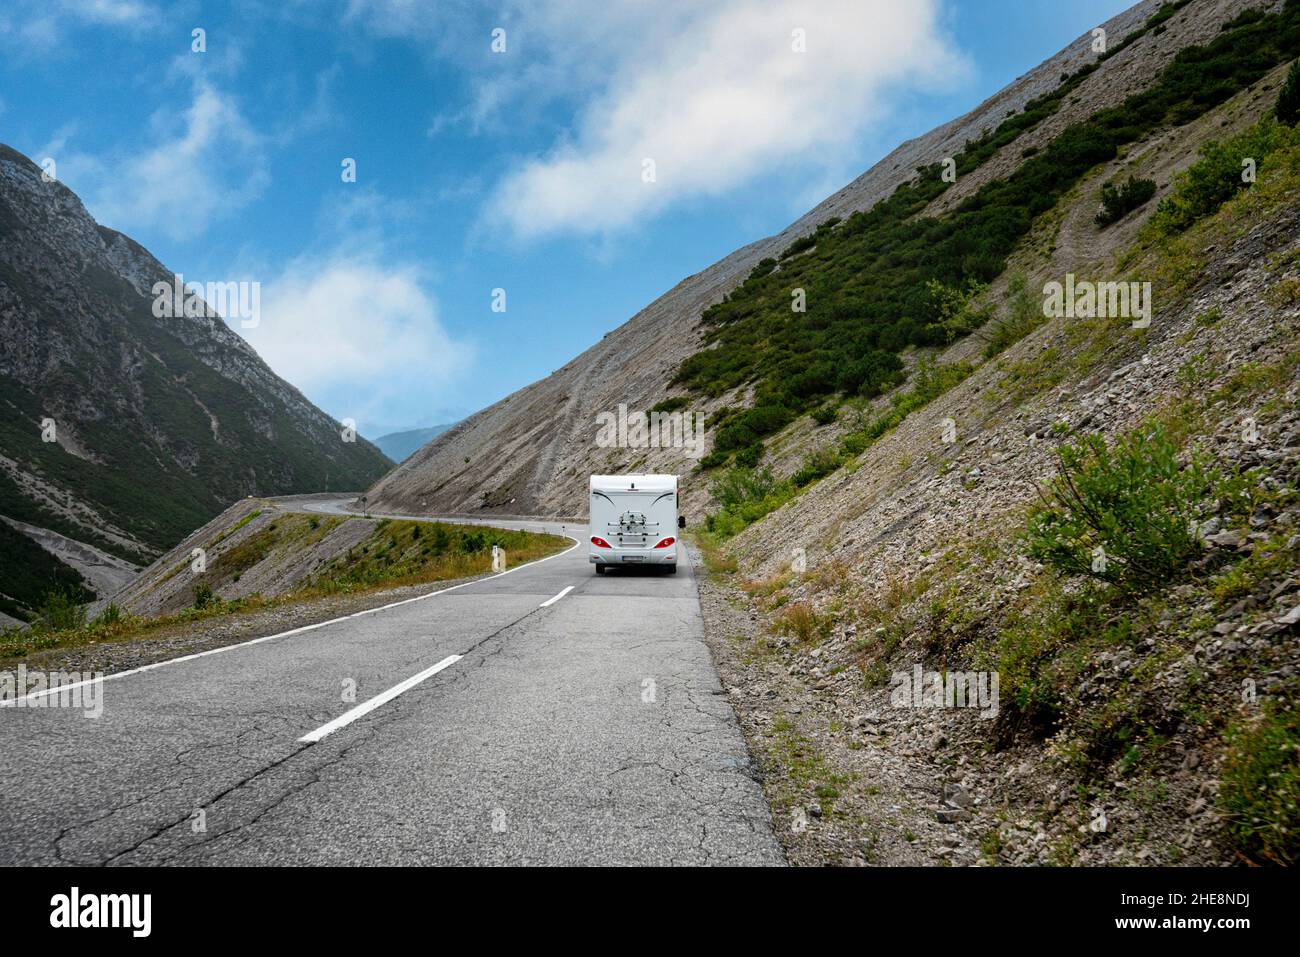 Page 9 - Motorhome in mountains High Resolution Stock Photography and  Images - Alamy